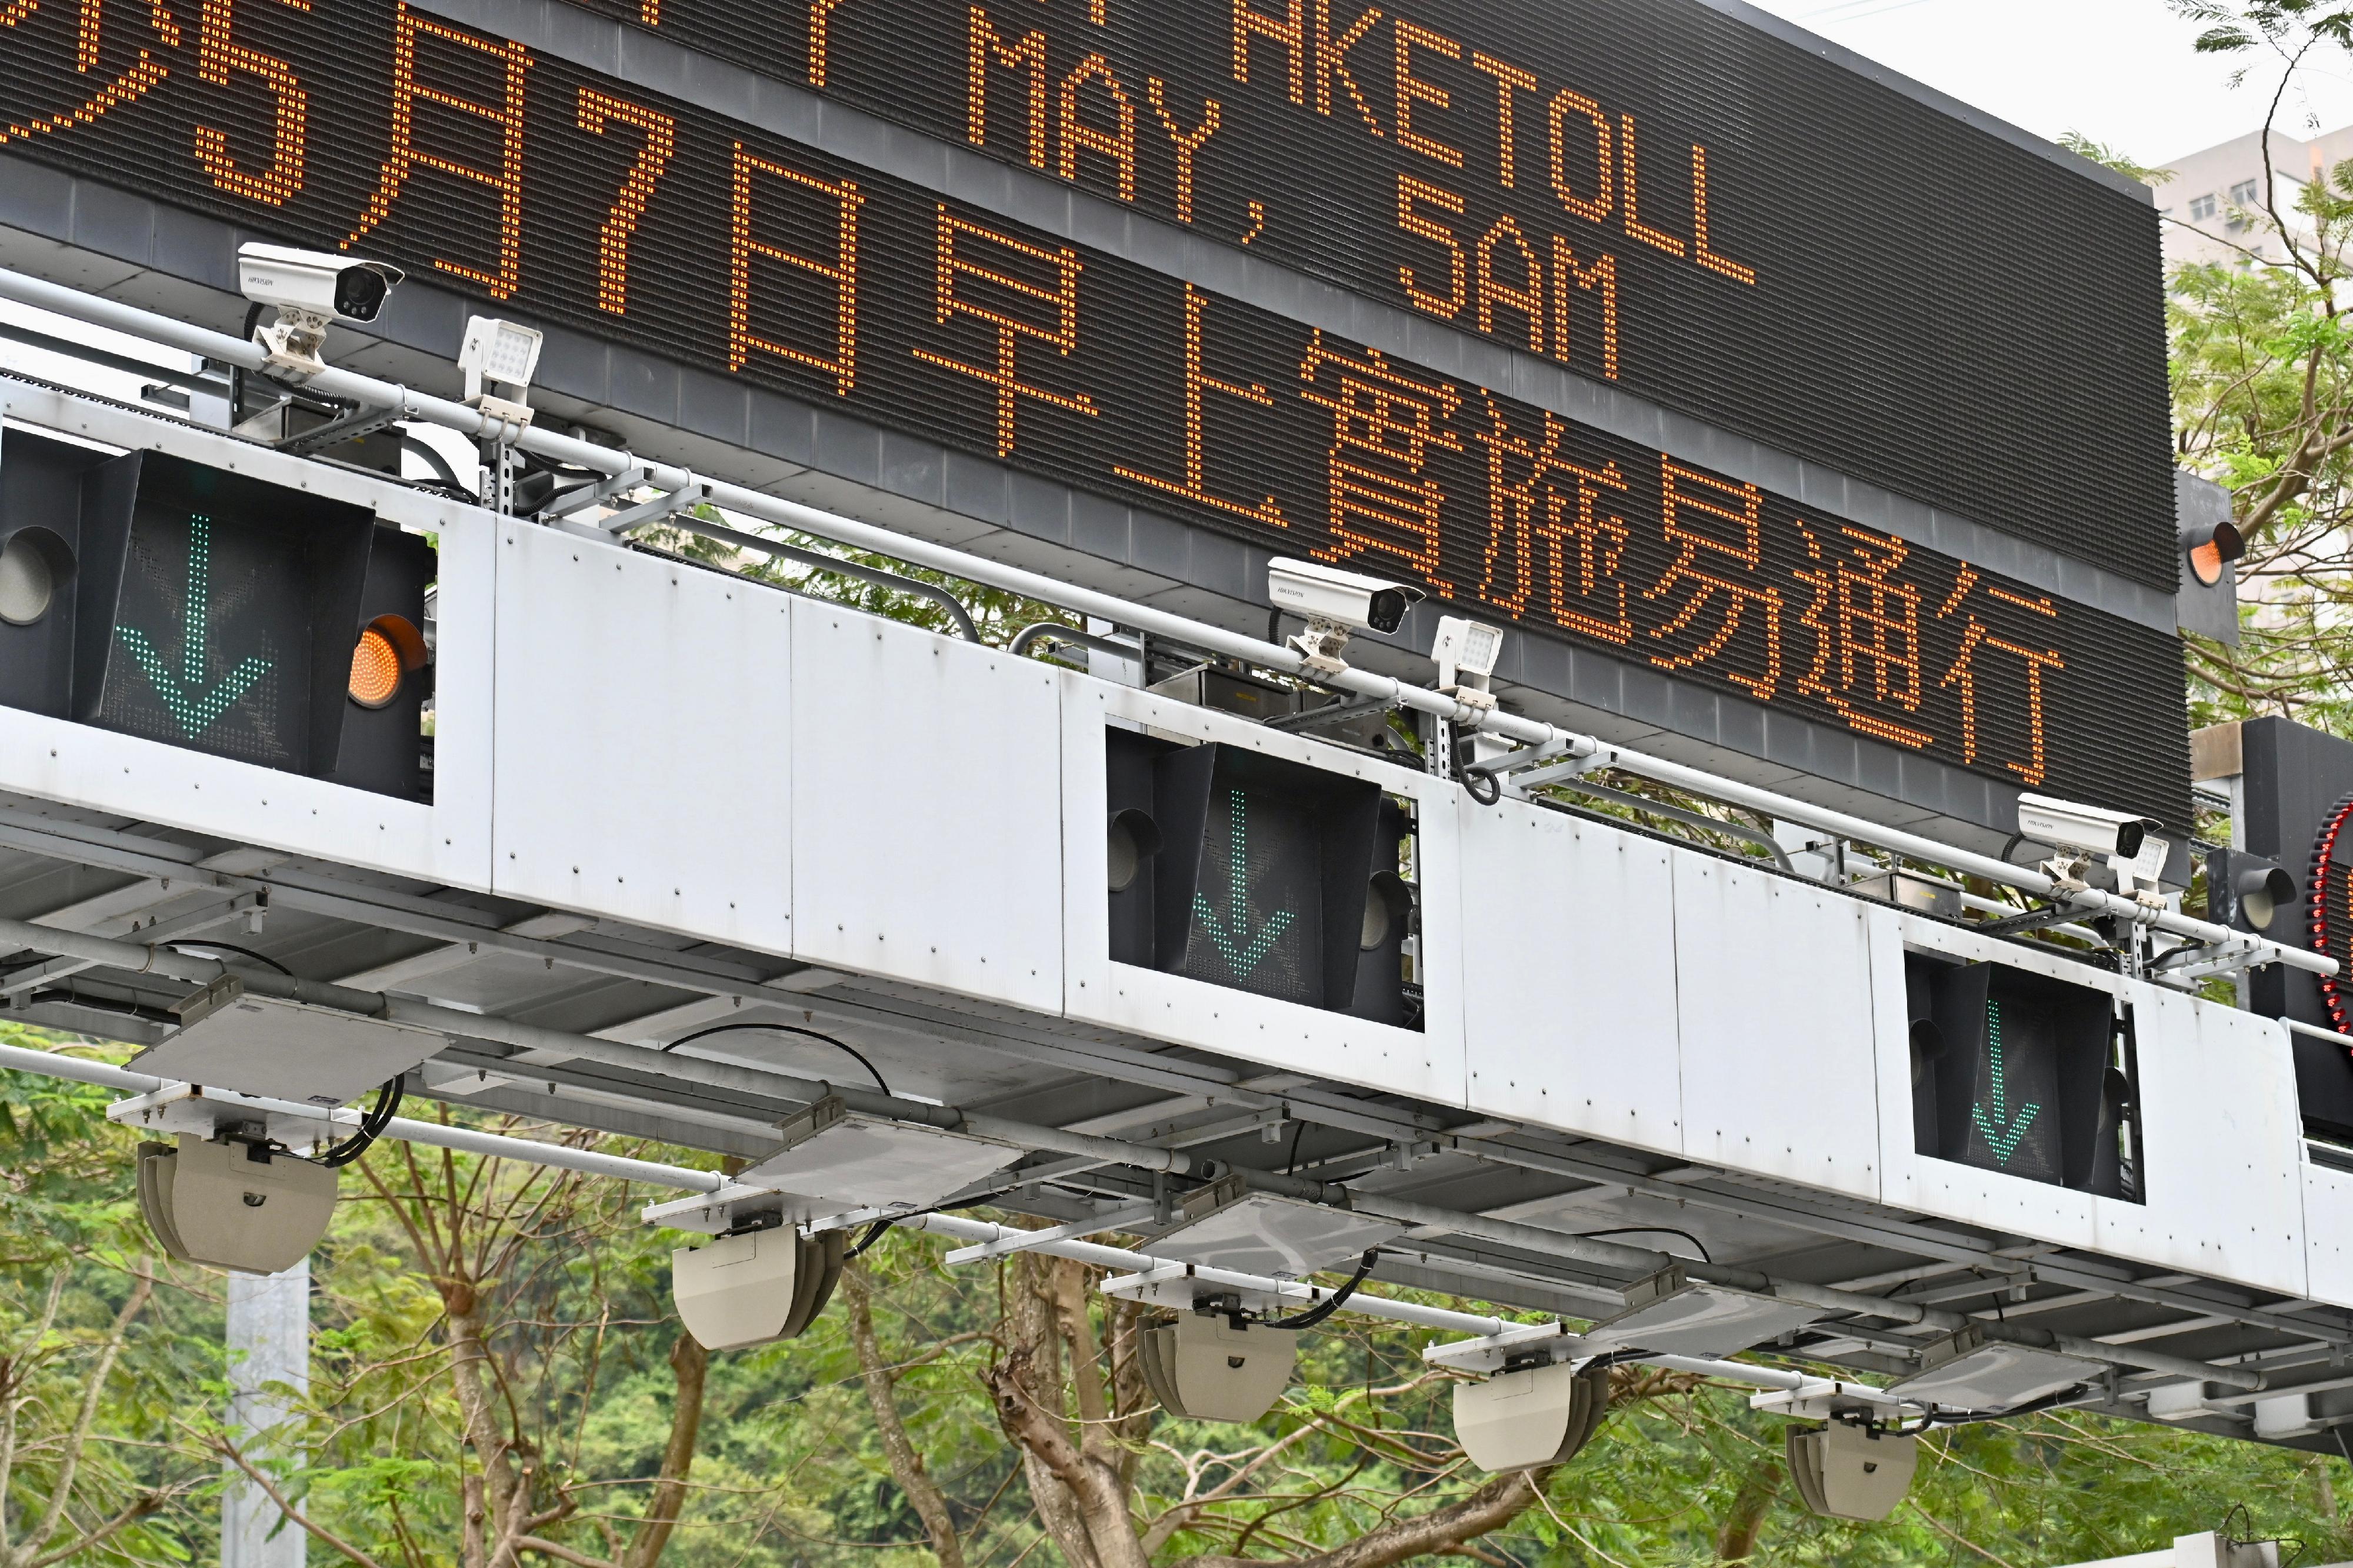 The HKeToll makes use of Radio Frequency Identification (RFID) technology, with the support of automatic number plate recognition technology, to allow vehicles to pay tolls without stopping at toll booths. Photo shows the system in the Tsing Sha Control Area. The use of a tolled tunnel by a motor vehicle will be detected by the field equipment through reading a toll tag affixed on the windscreen of the vehicle or by capturing the image of the vehicle's number plate, and recognising the vehicle registration mark automatically. Tunnel tolls will be deducted from the pre-set toll payment account in the system, and the user will be notified.